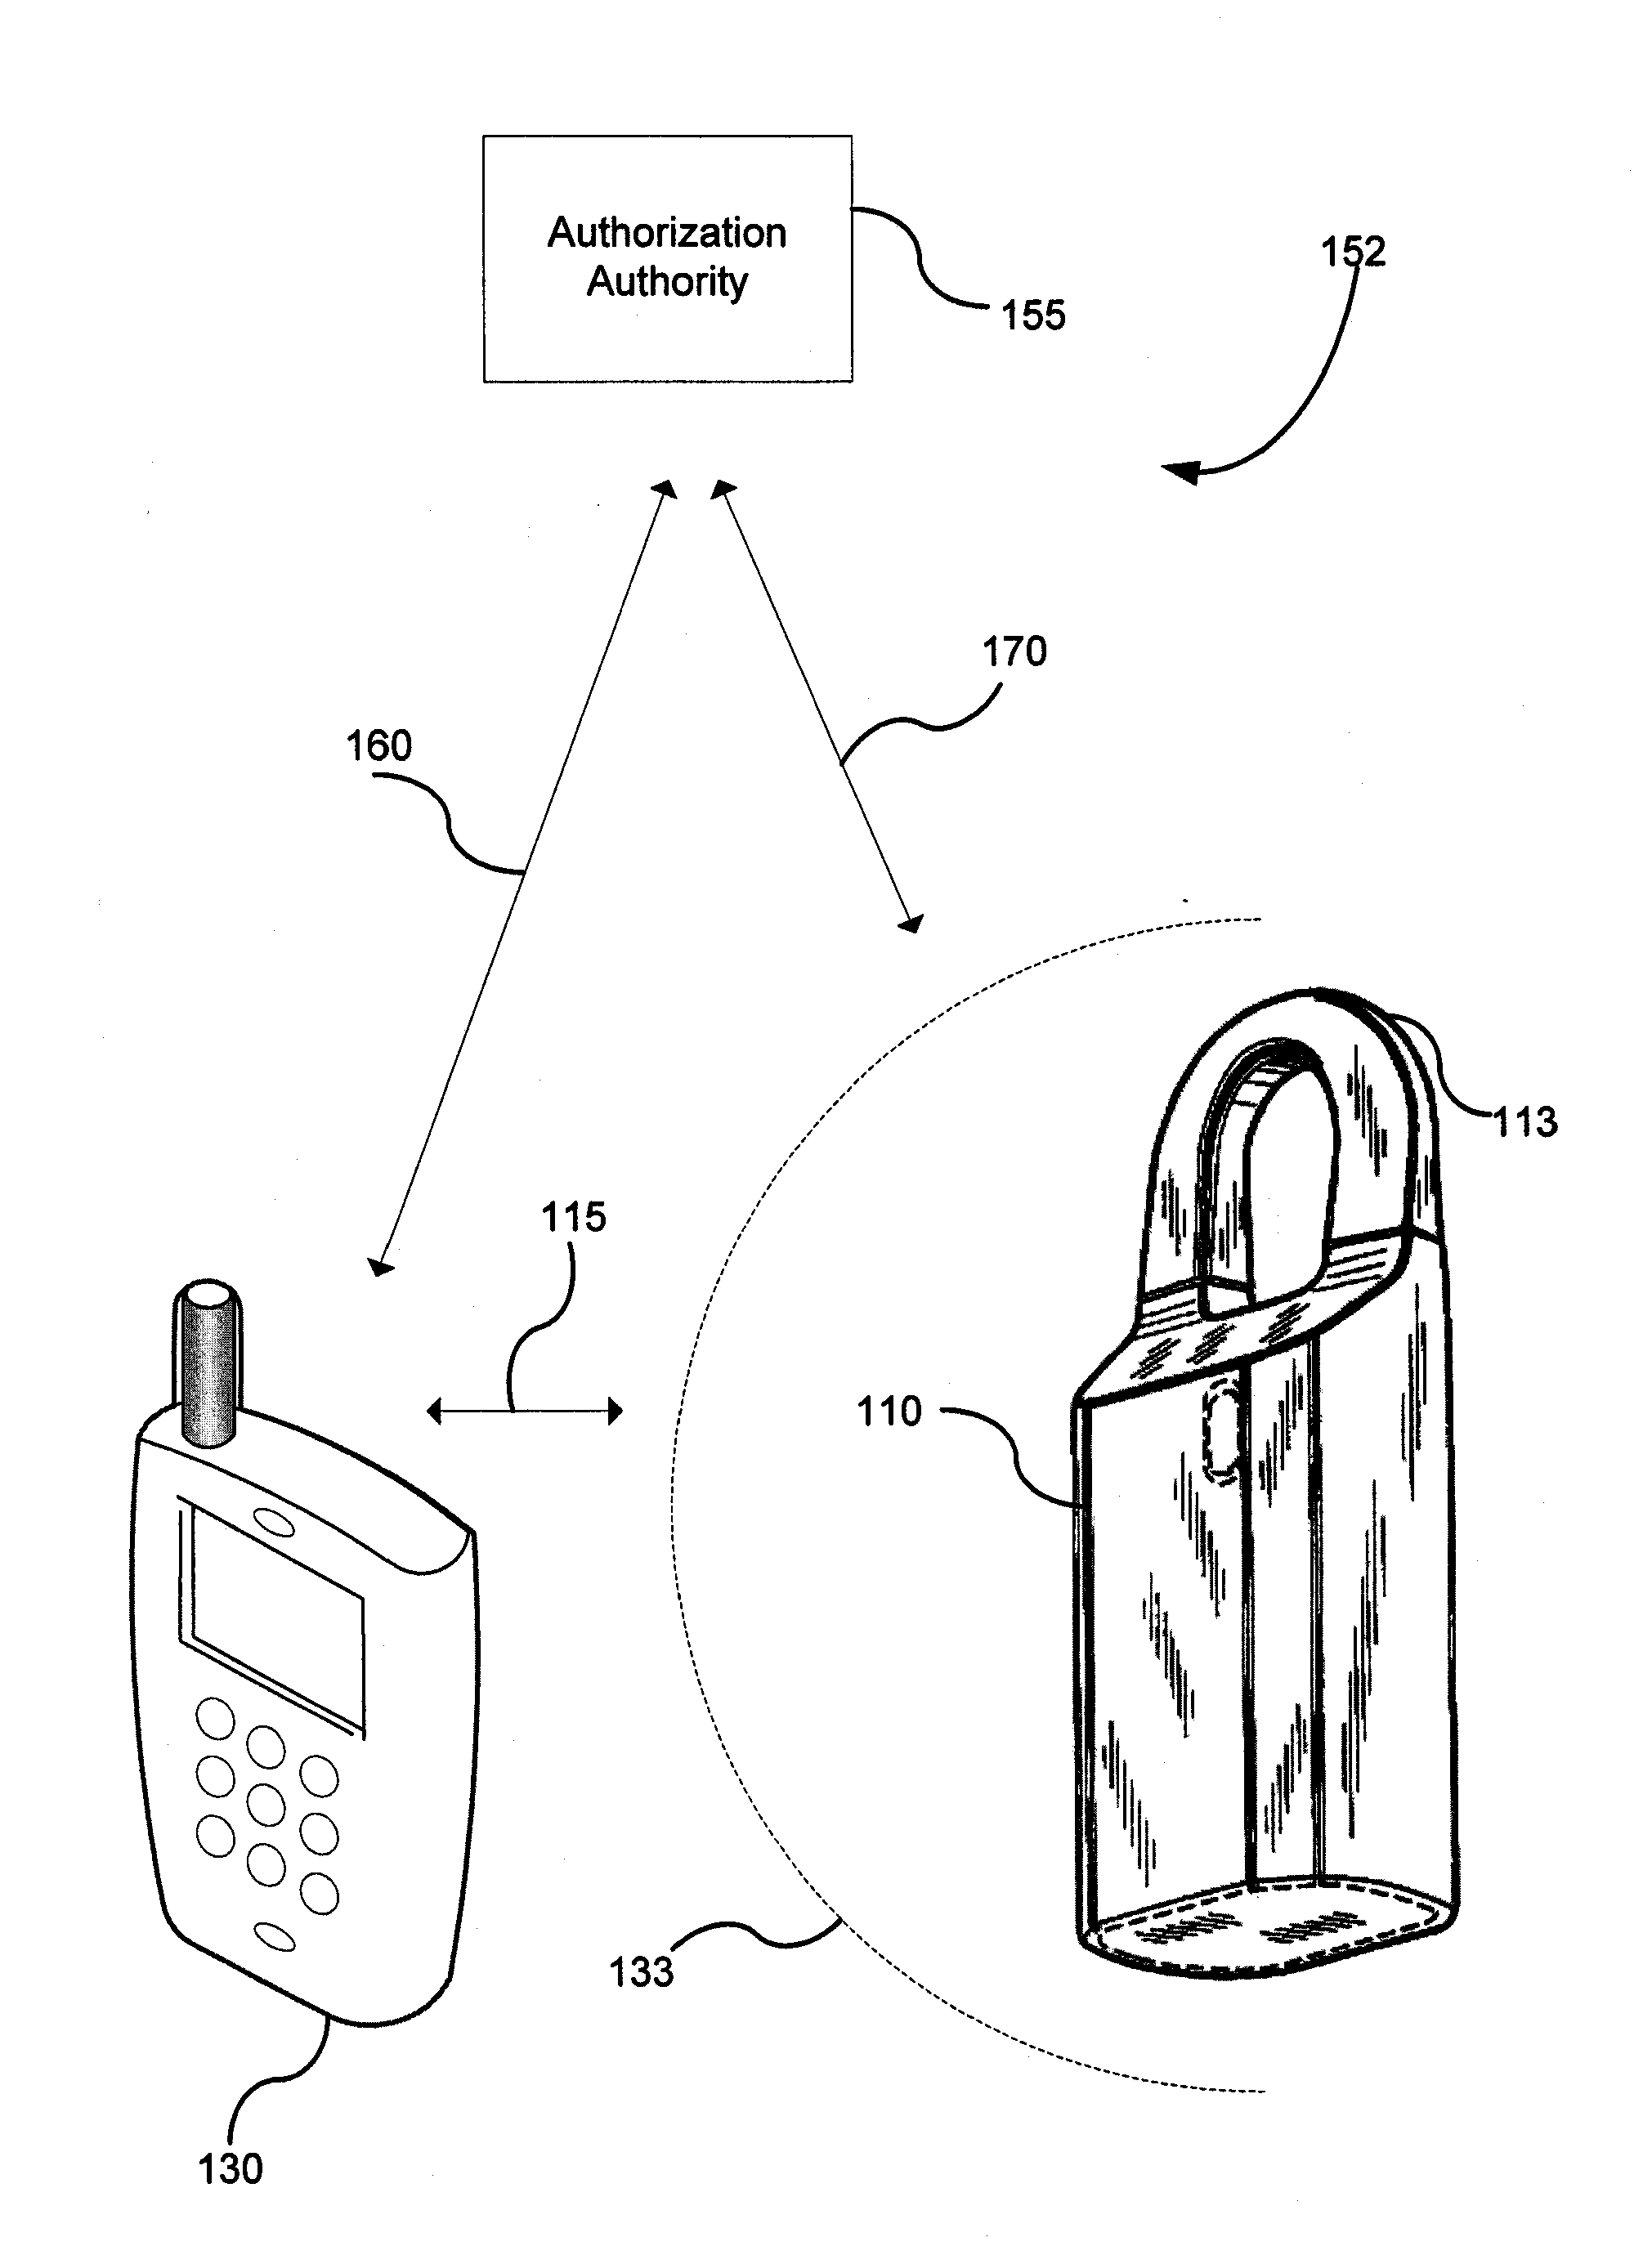 Method and apparatus for communicating access to a lockbox